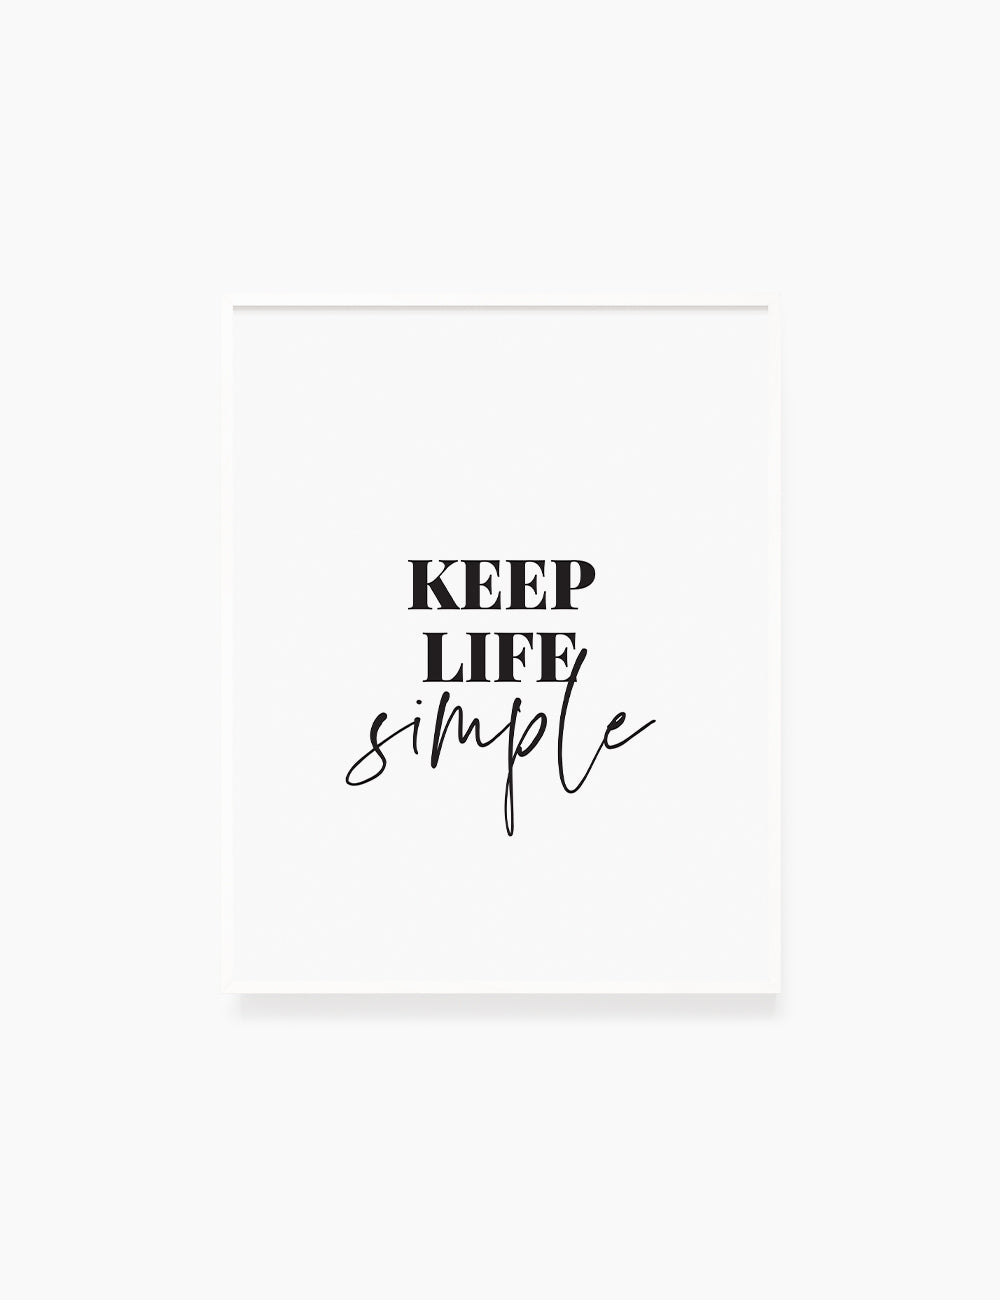 Printable Wall Art Quote: KEEP LIFE SIMPLE. Printable Poster. Inspirational Quote. Motivational Quote. WA019 - Paper Moon Art & Design